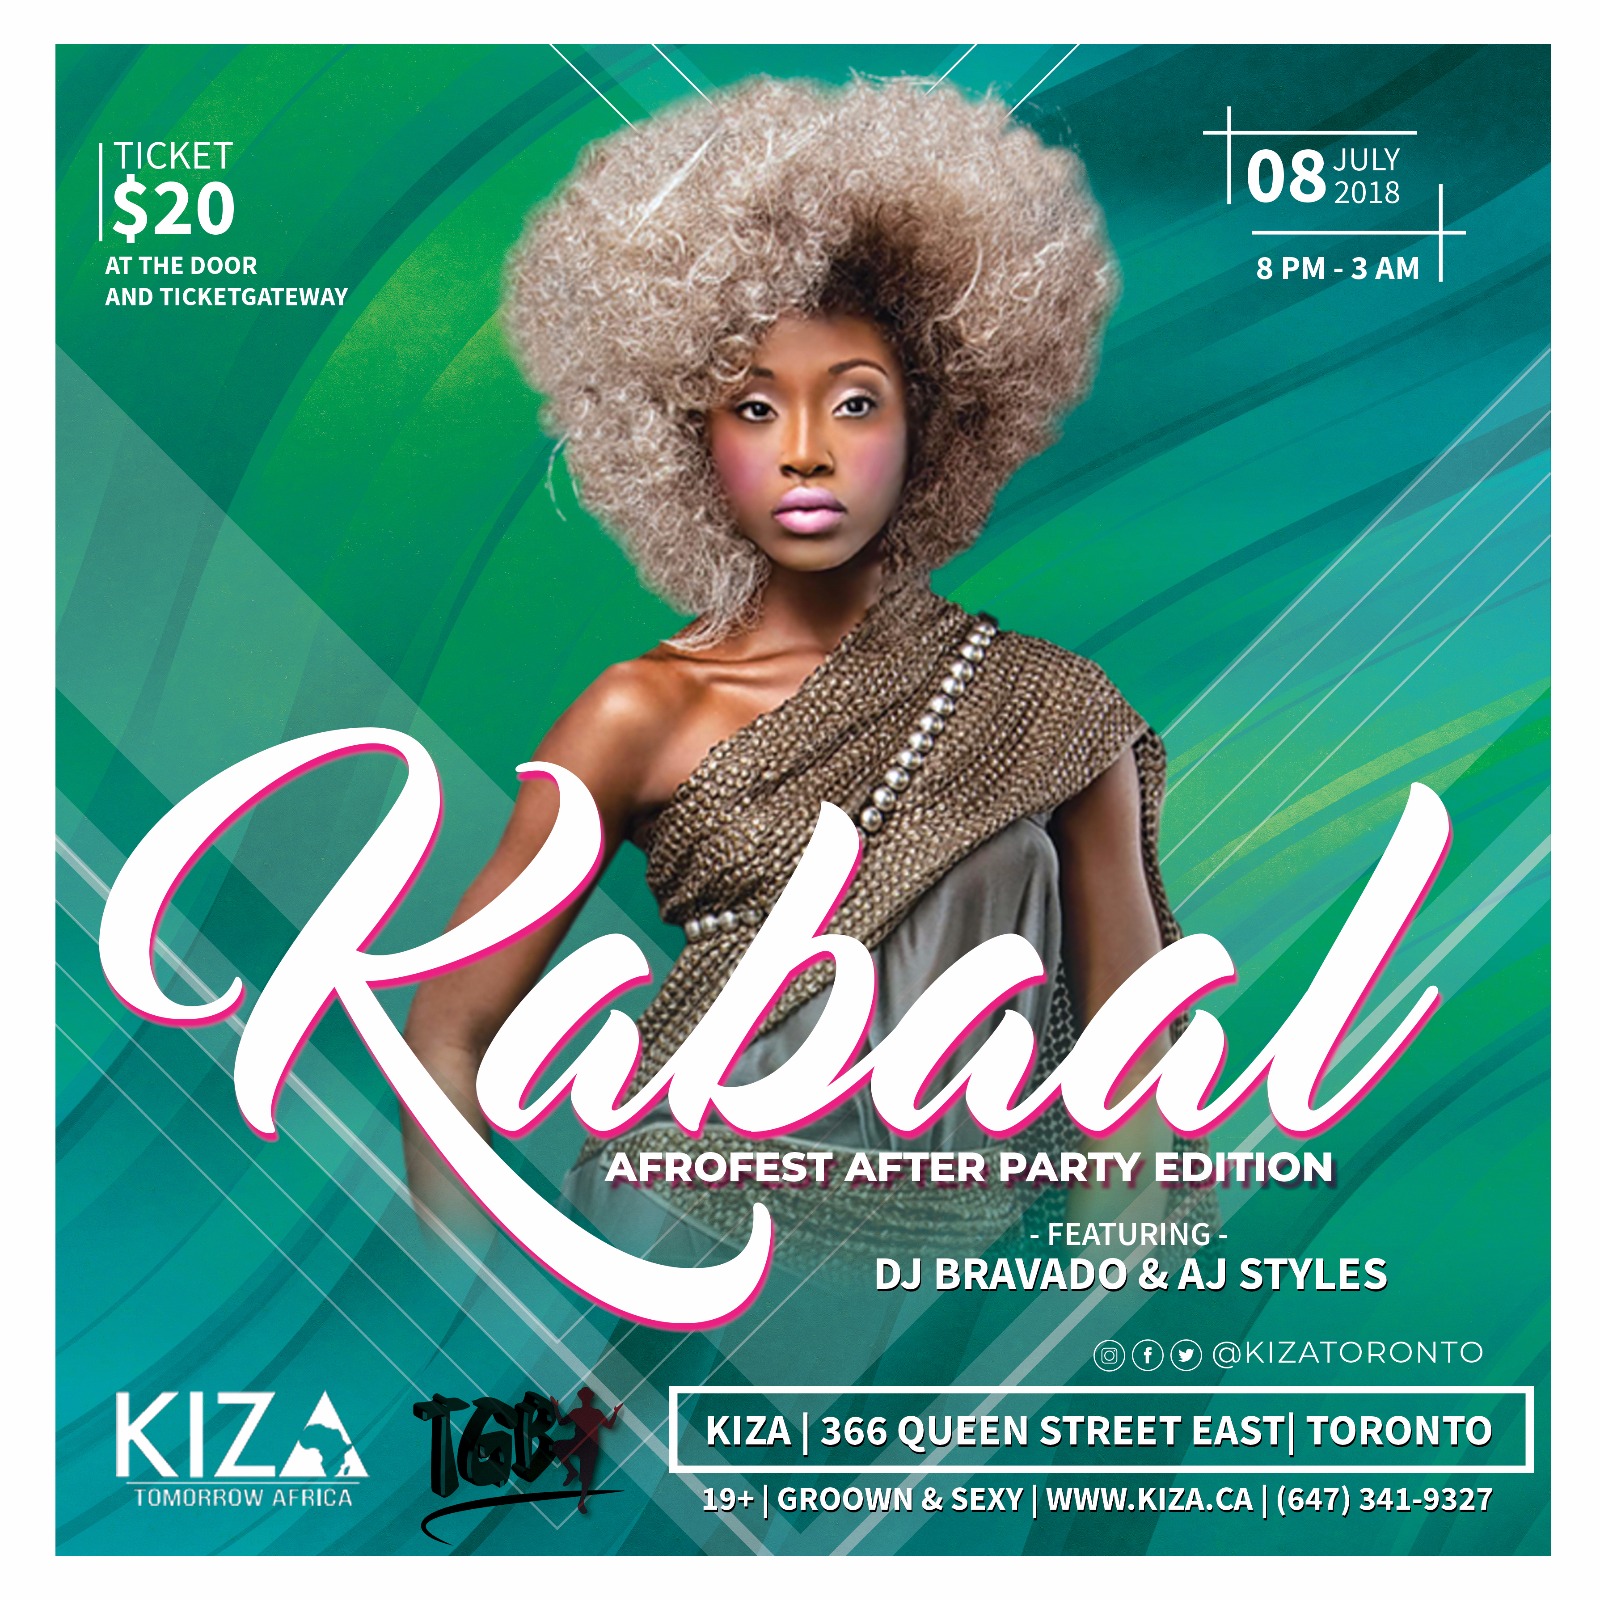 THE KABAAL - Afrofest After Party Edition